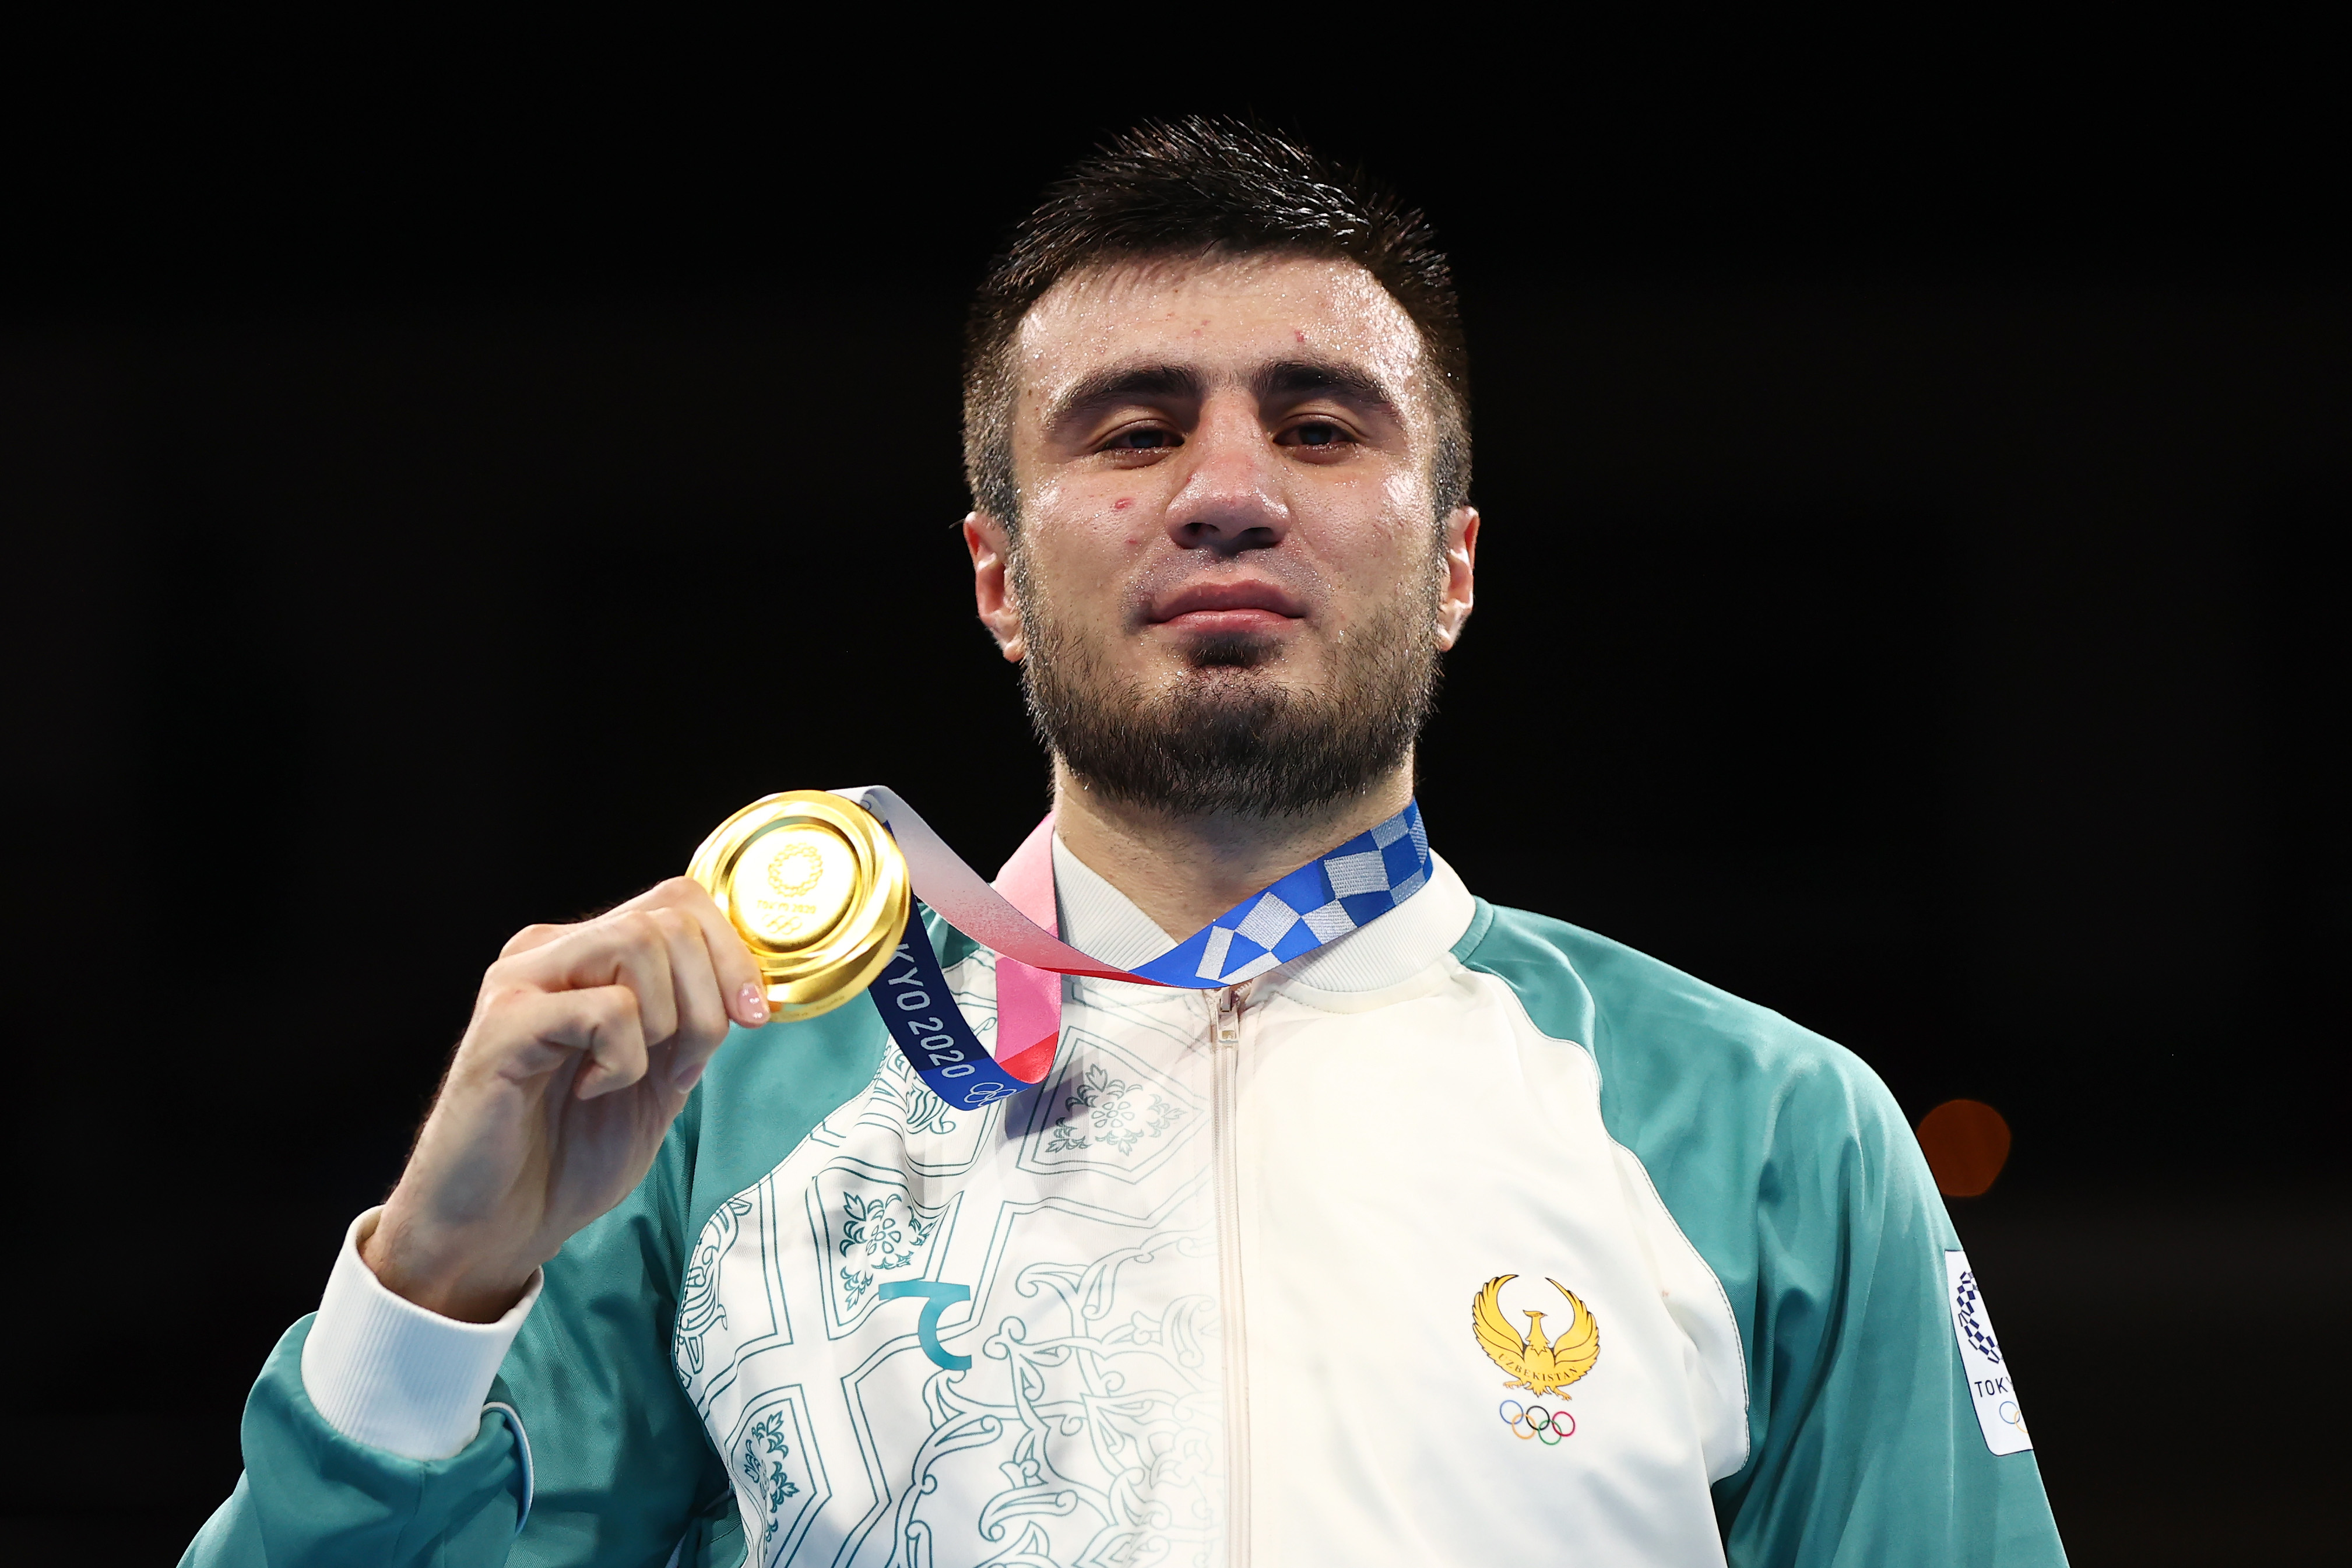 Tokyo gold medalist Jalolov is expected to do big things in the pros